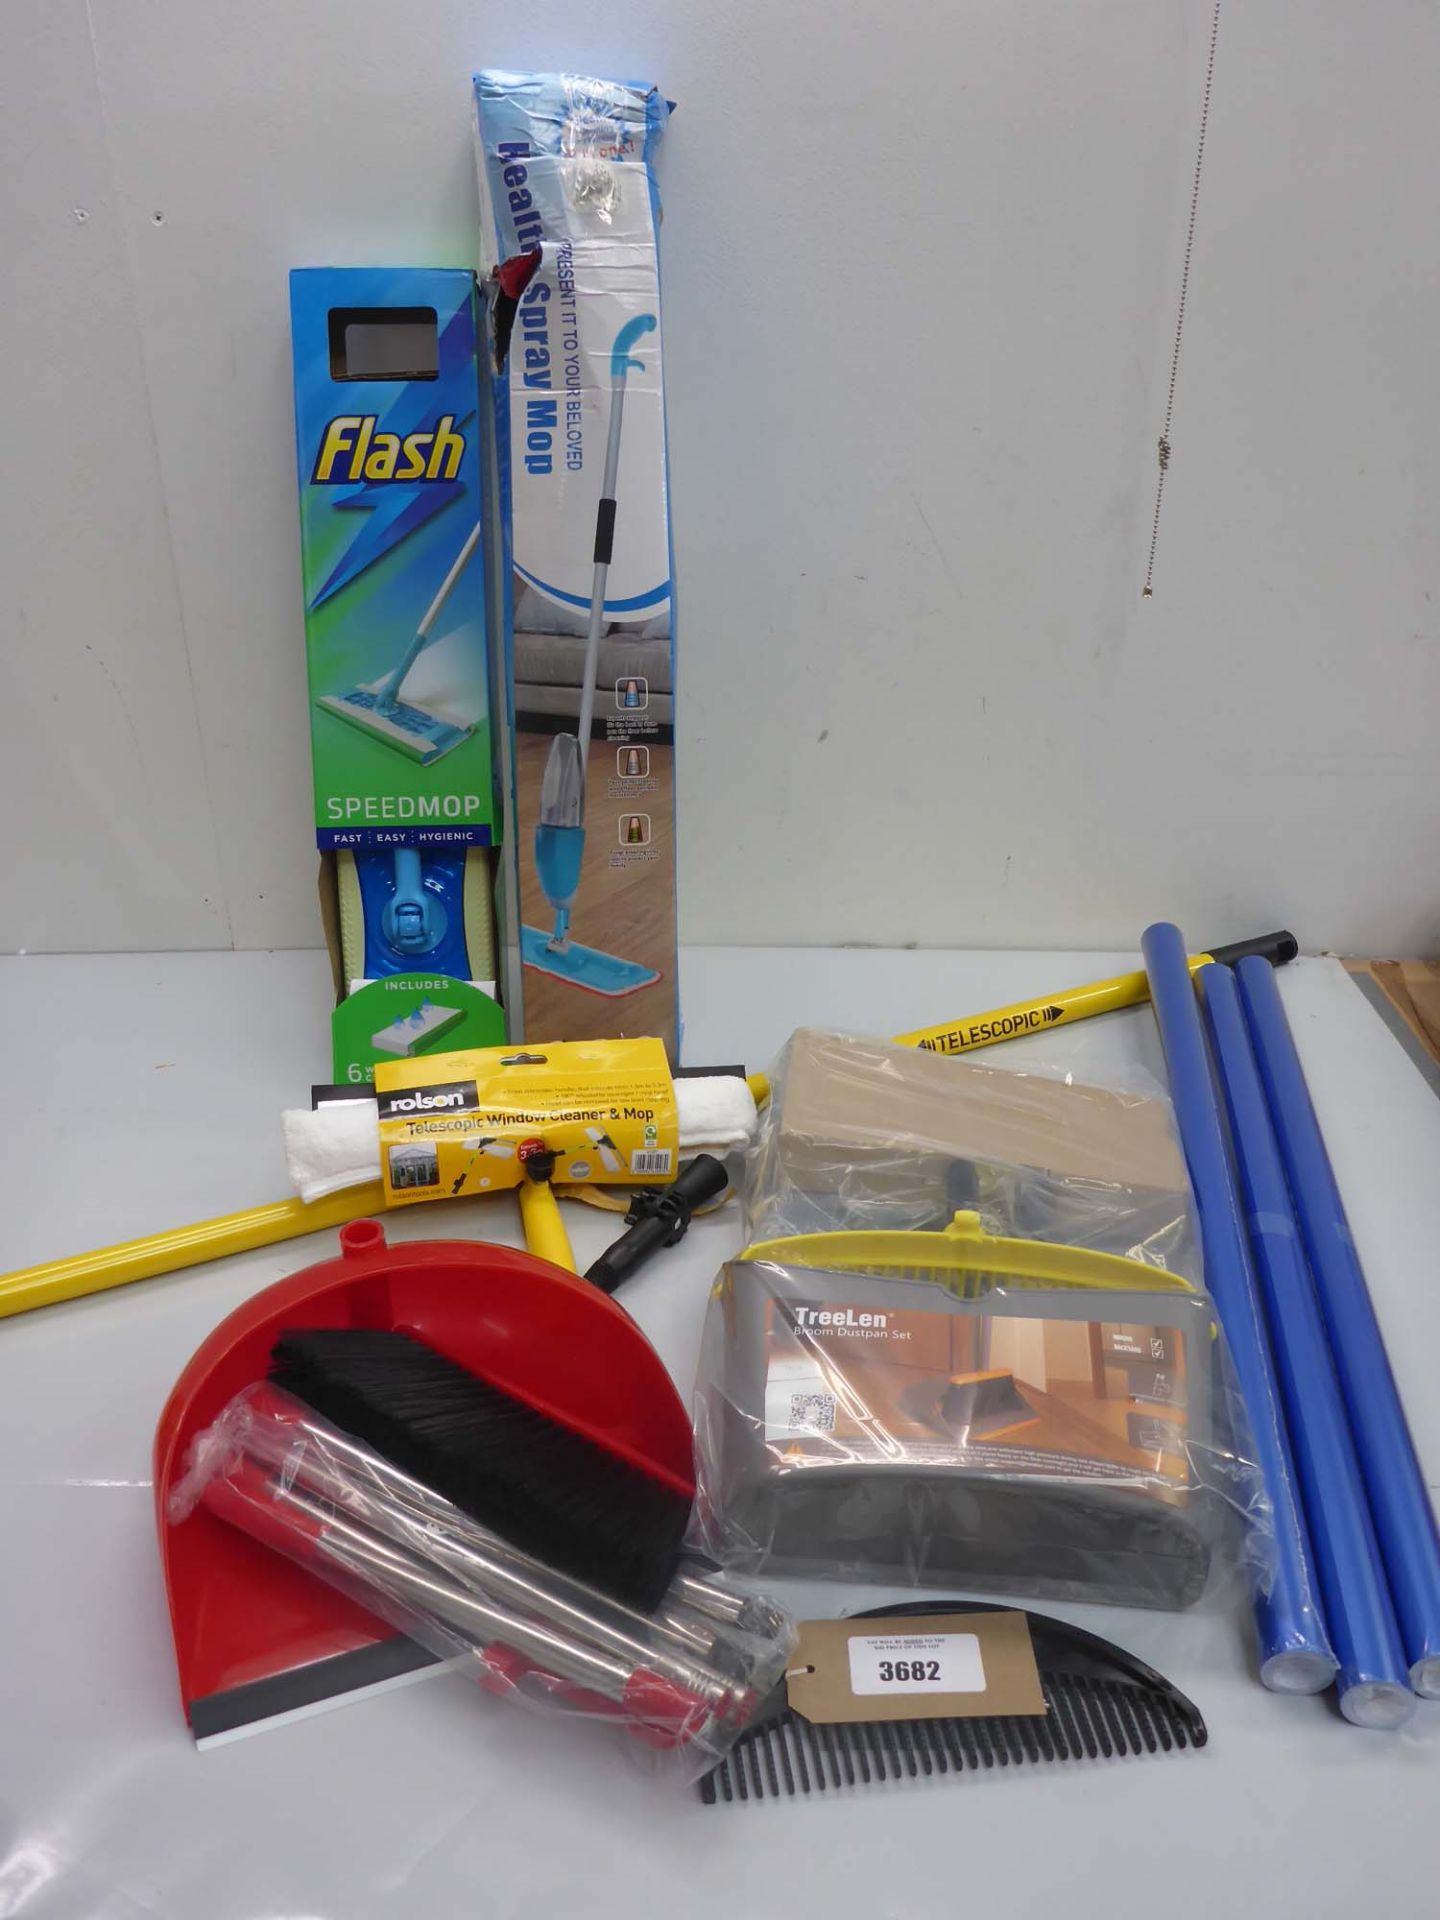 Telescopic window cleaner, 2 dust pan & brush sets, Flash speed mop, Spray mop and 3 rolls gift wrap